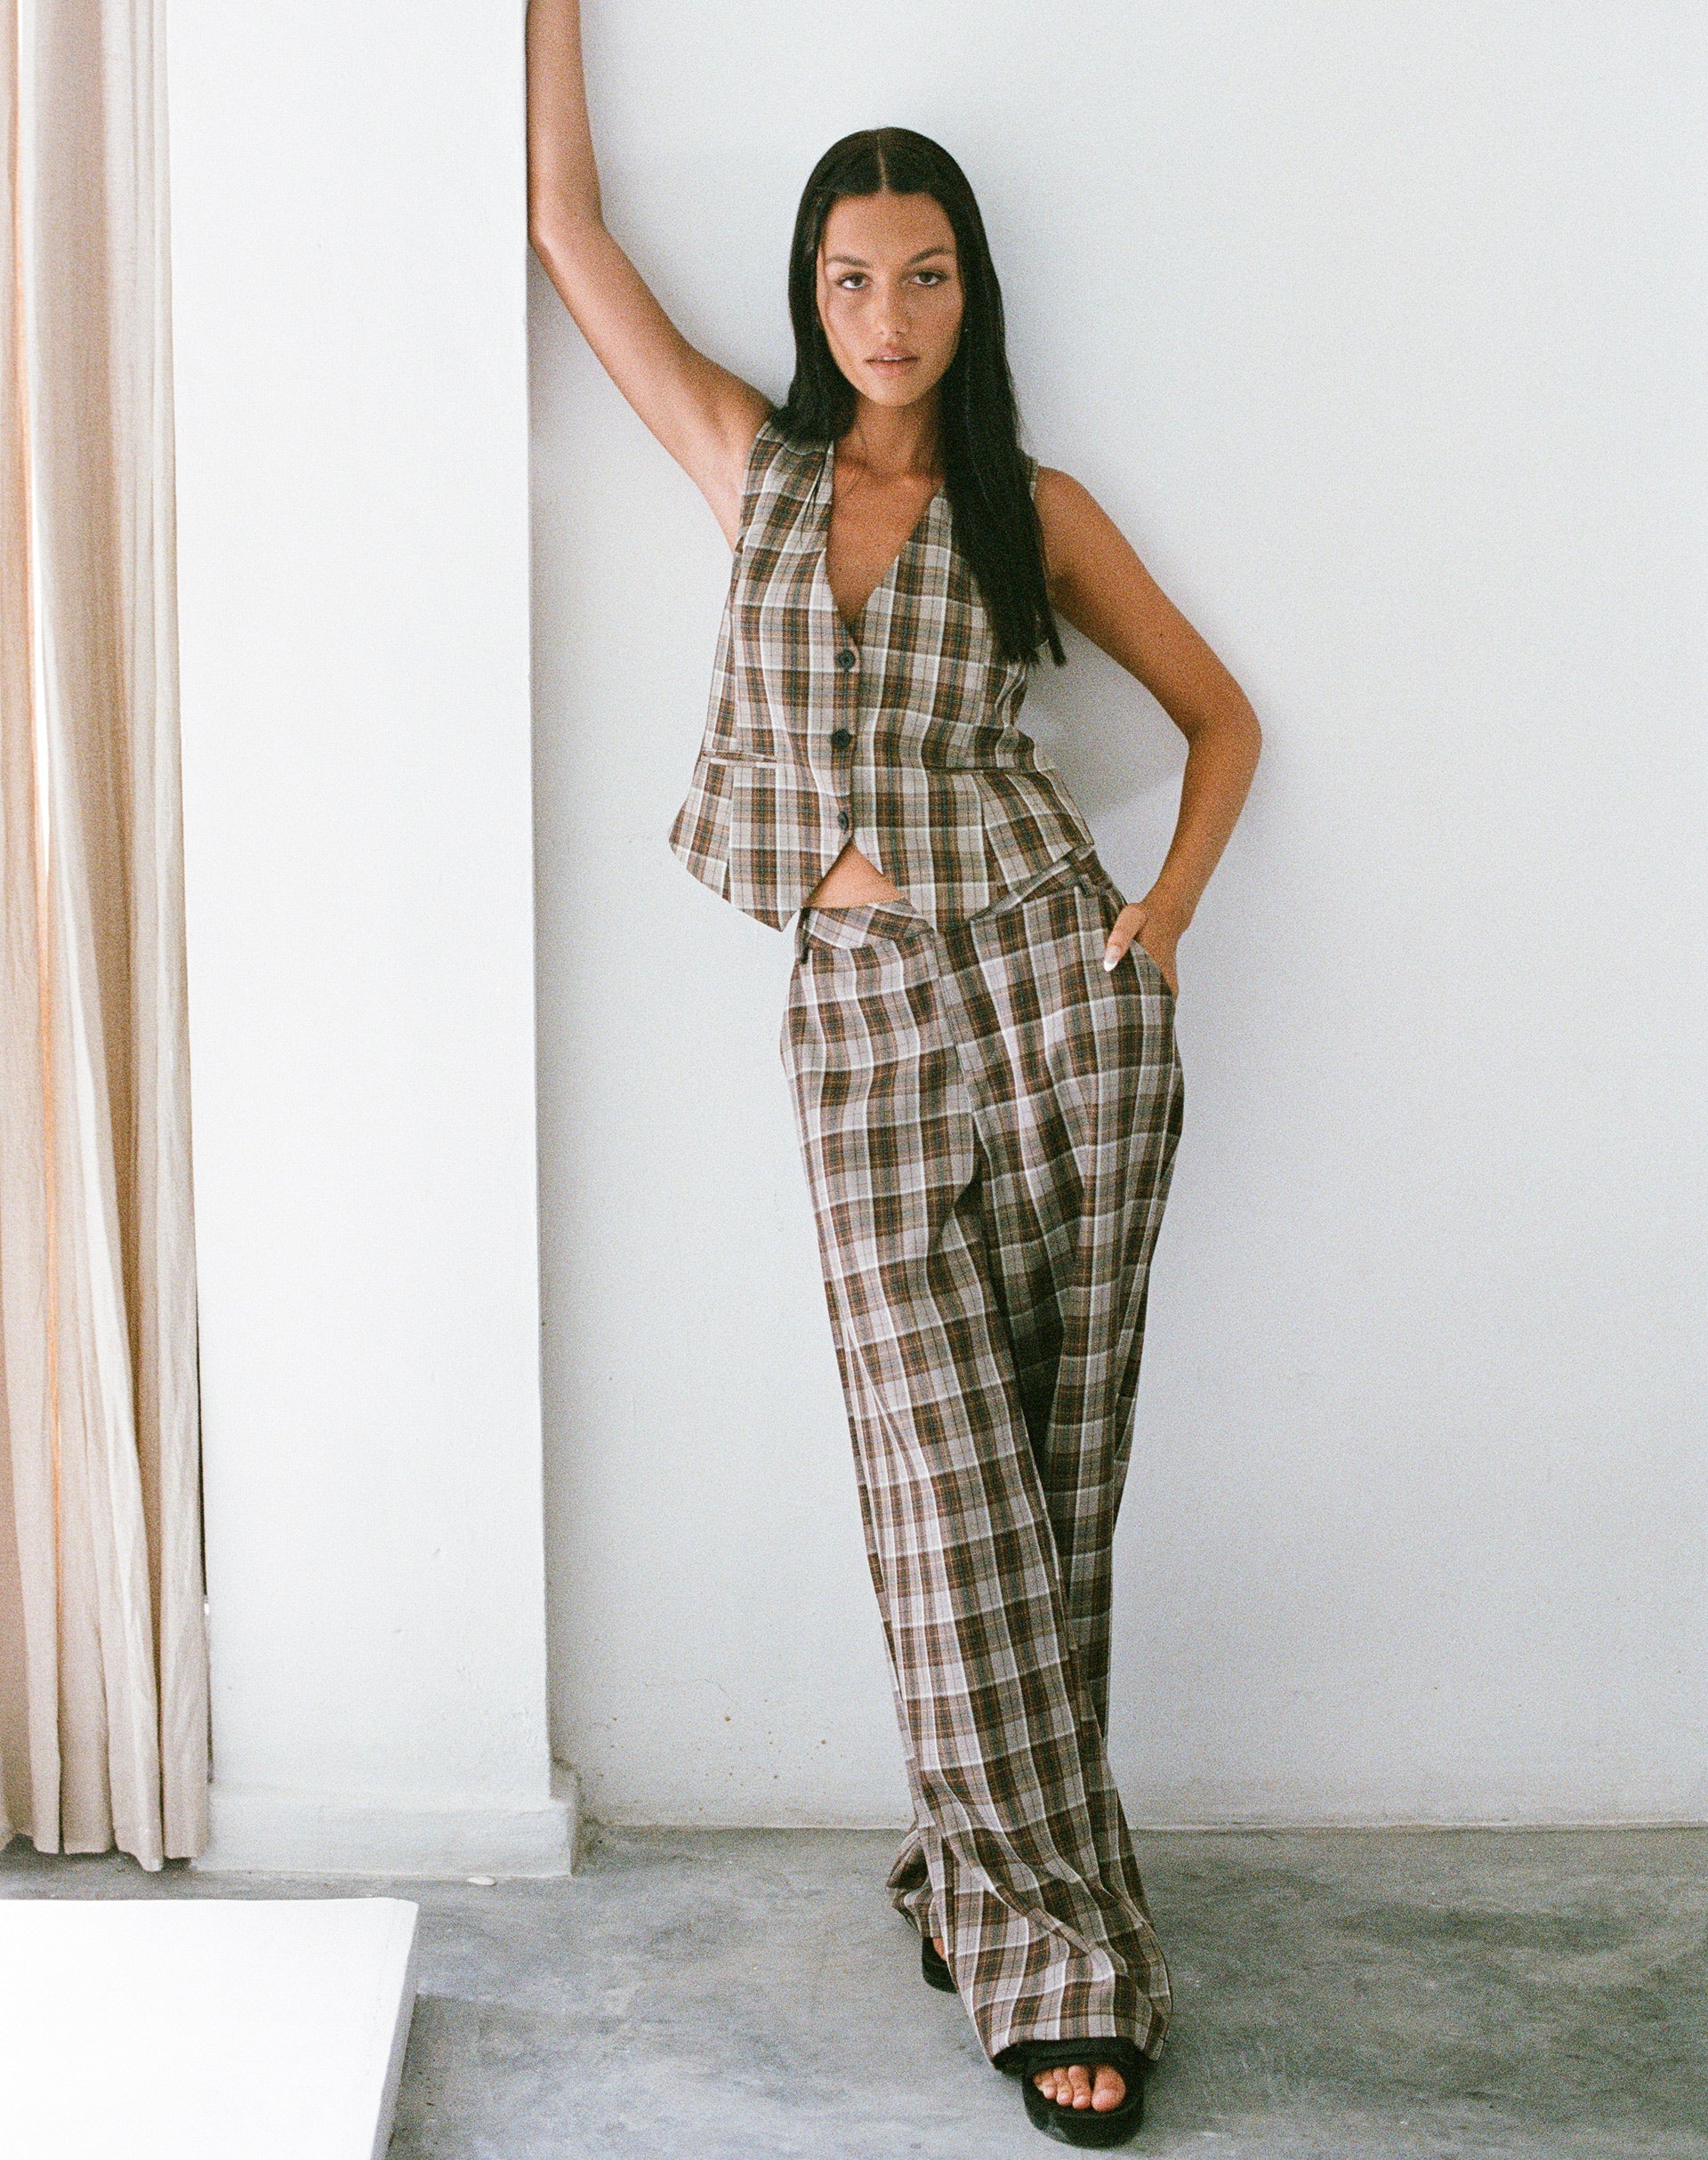 Image of MOTEL X OLIVIA NEILL Hondra Trouser in Check Tan Brown